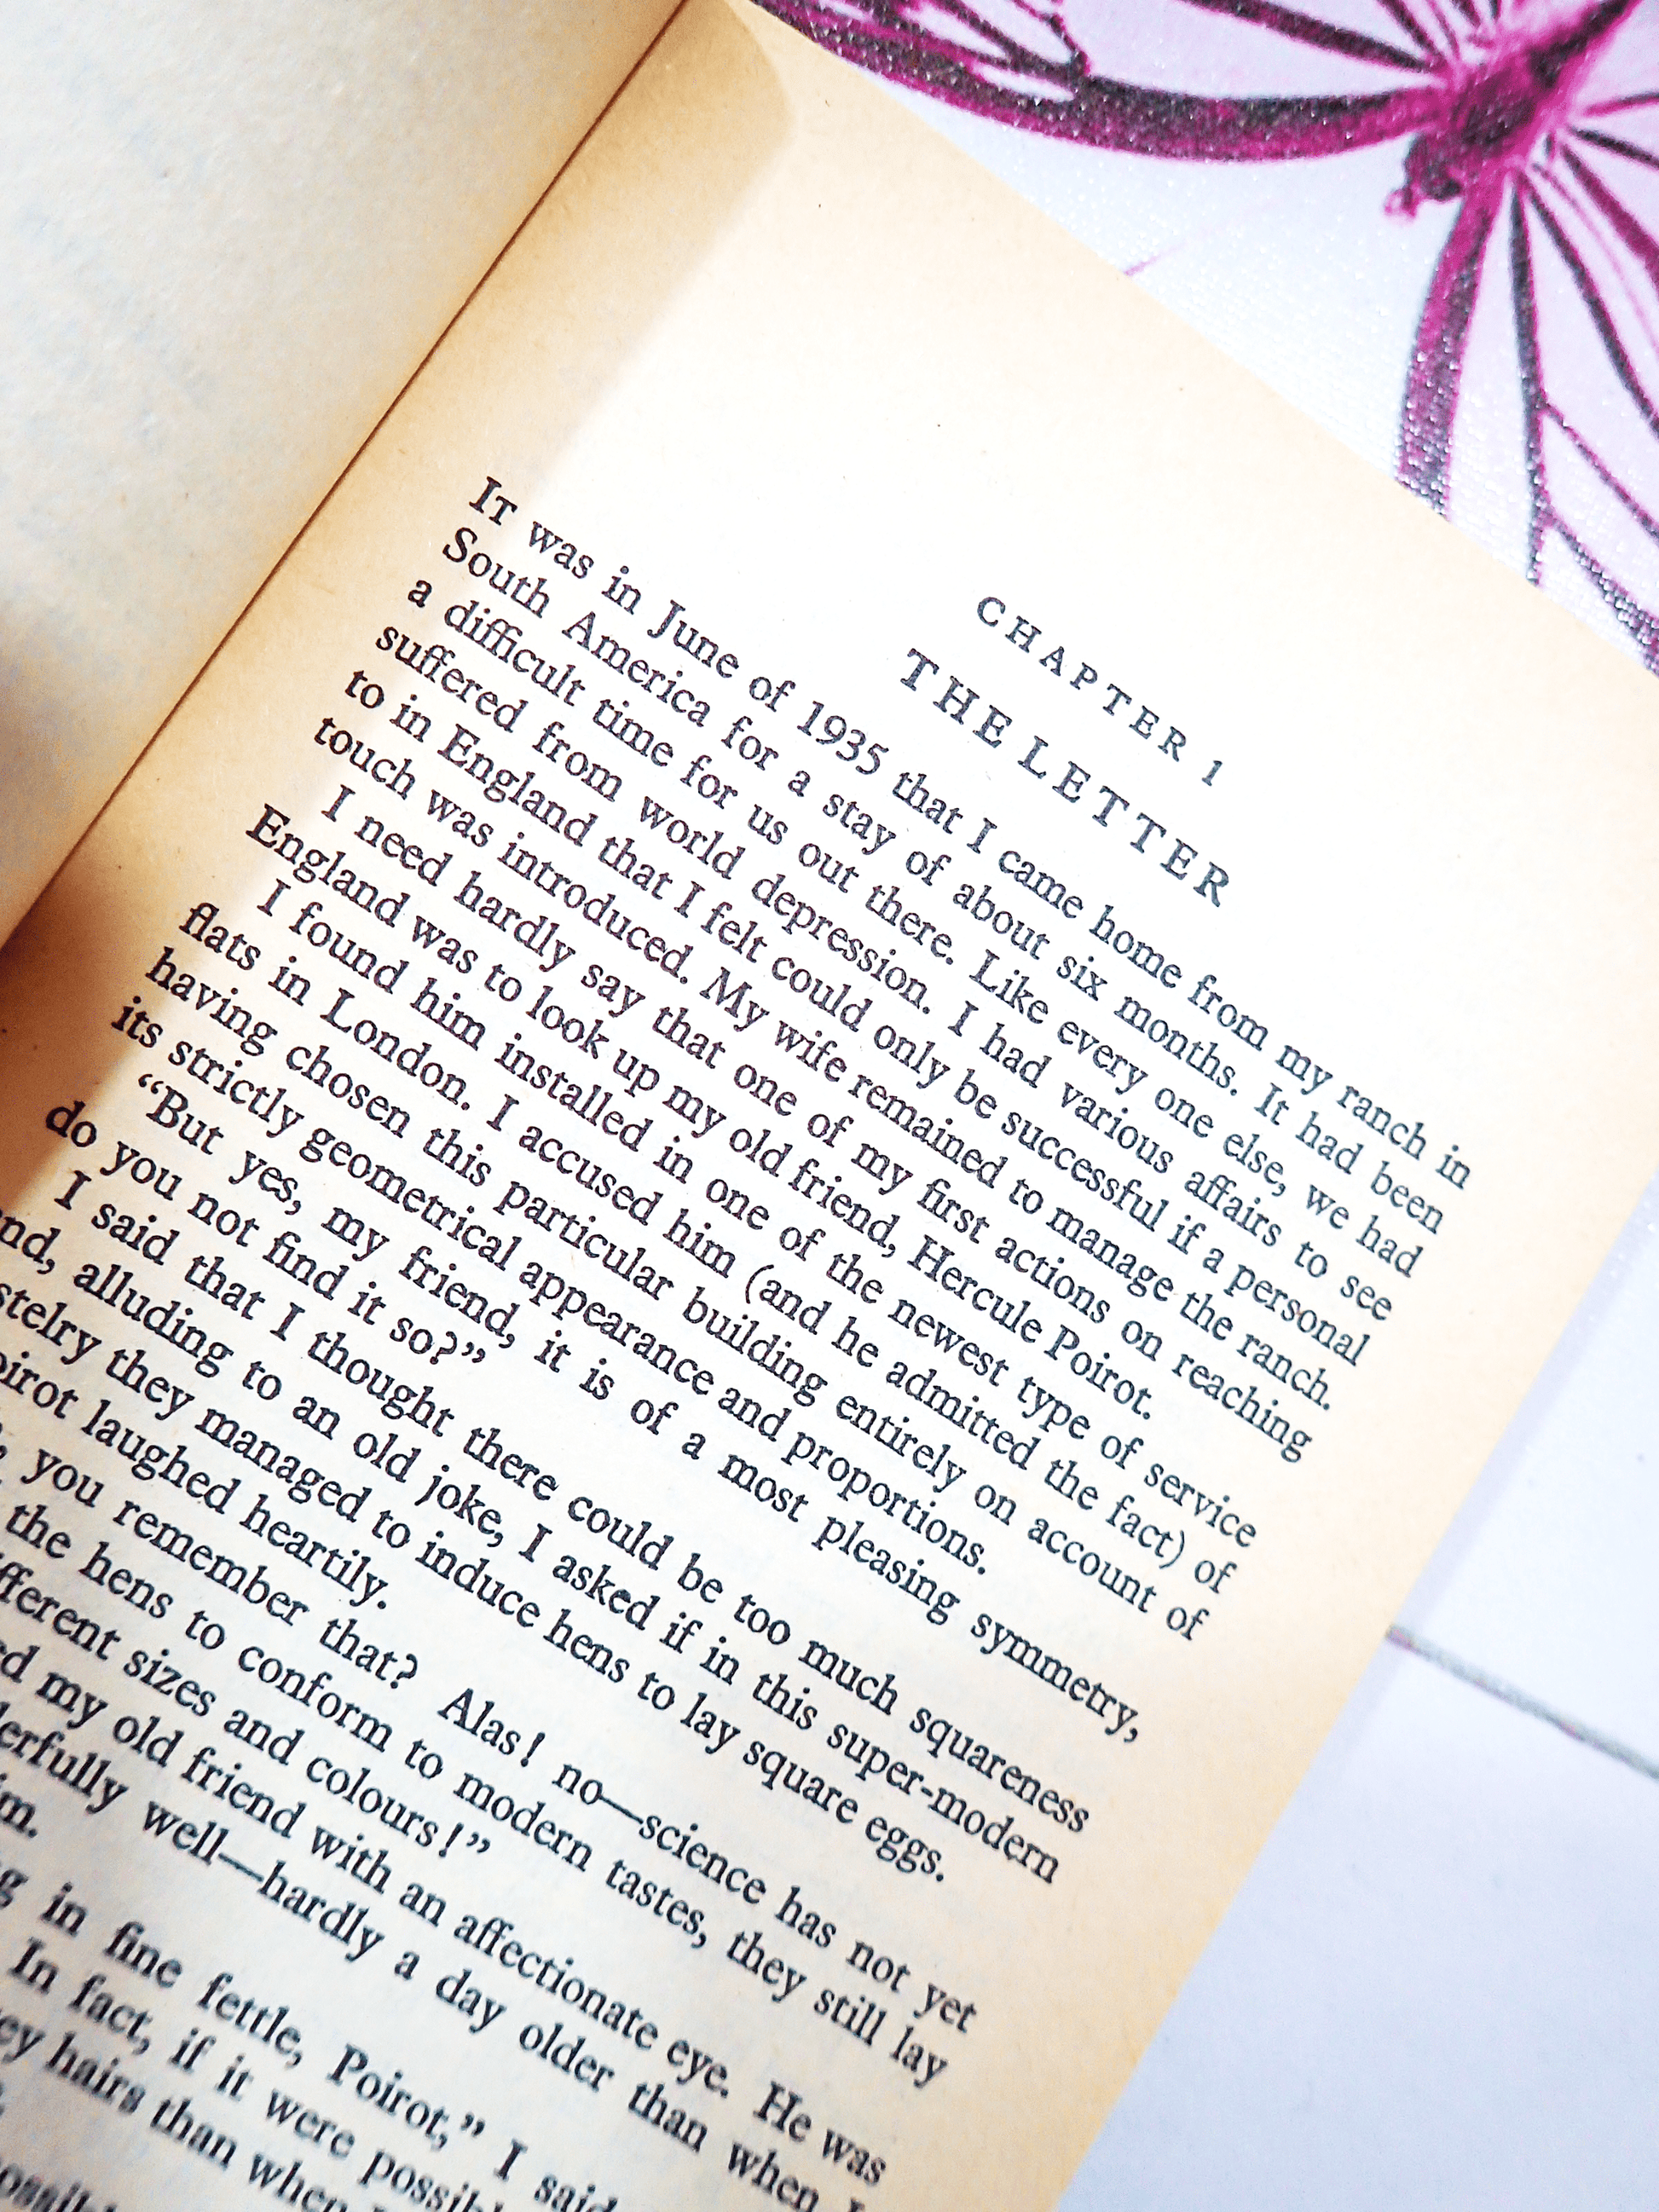 First Page of Agatha Christie The ABC Murders, Vintage Pan Paperback Book. Classic Crime Fiction. Showing text: "Chapter 1. The Letter, It was in June of 1935....."